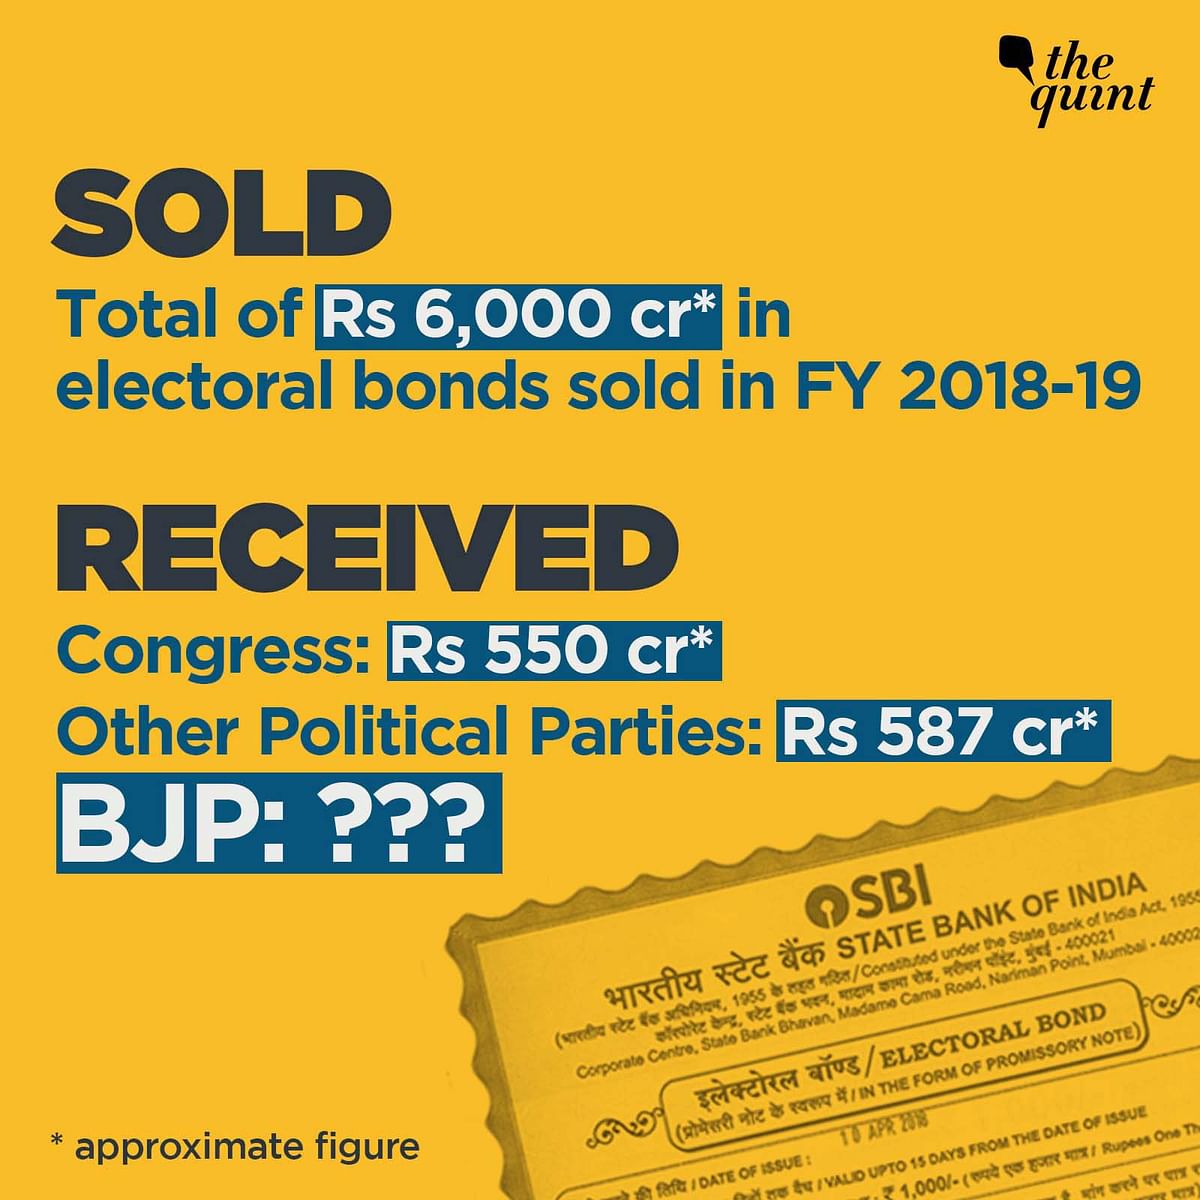 Major political parties except the BJP got 20% worth of all electoral bonds sold. Who got the rest?